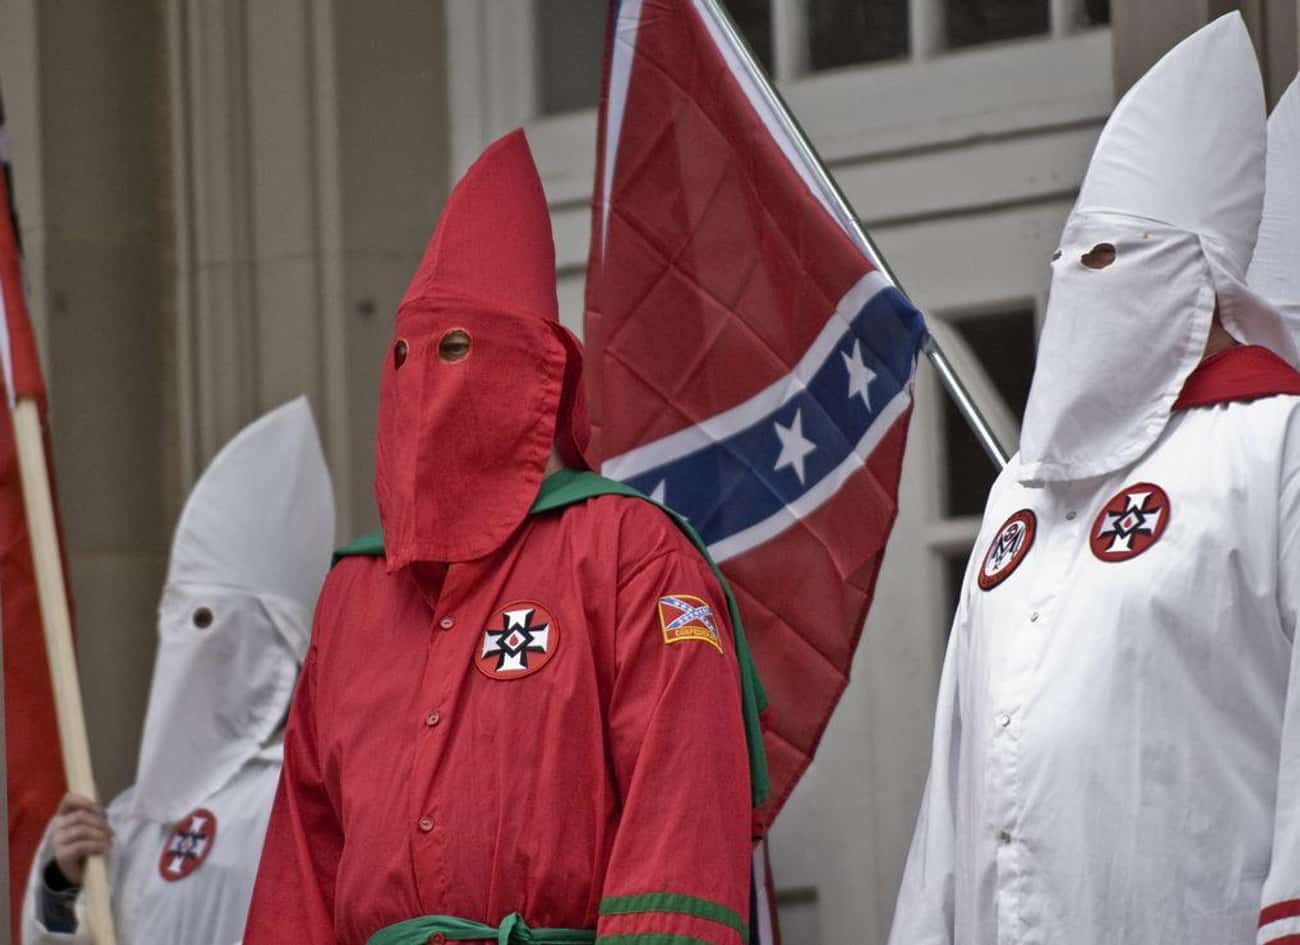 The Formation of the KKK